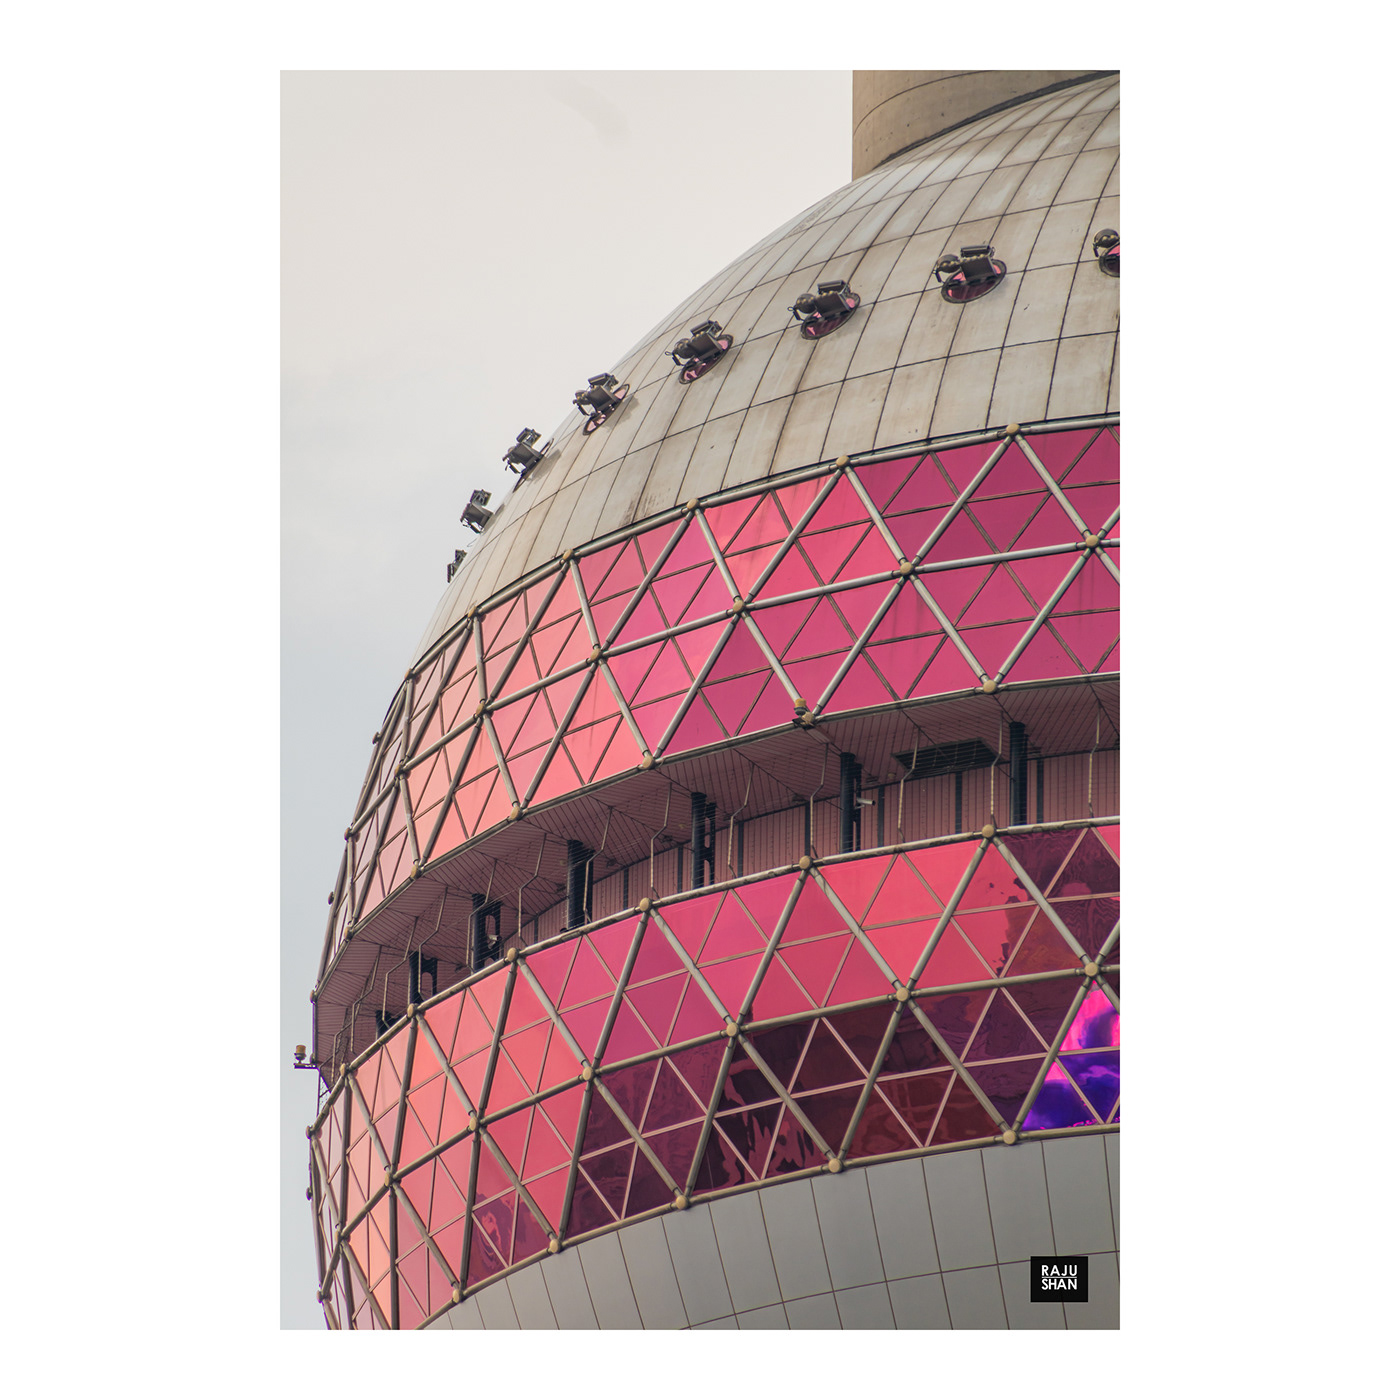 canon 800D explore oriental pearl tower Photography  shanghai